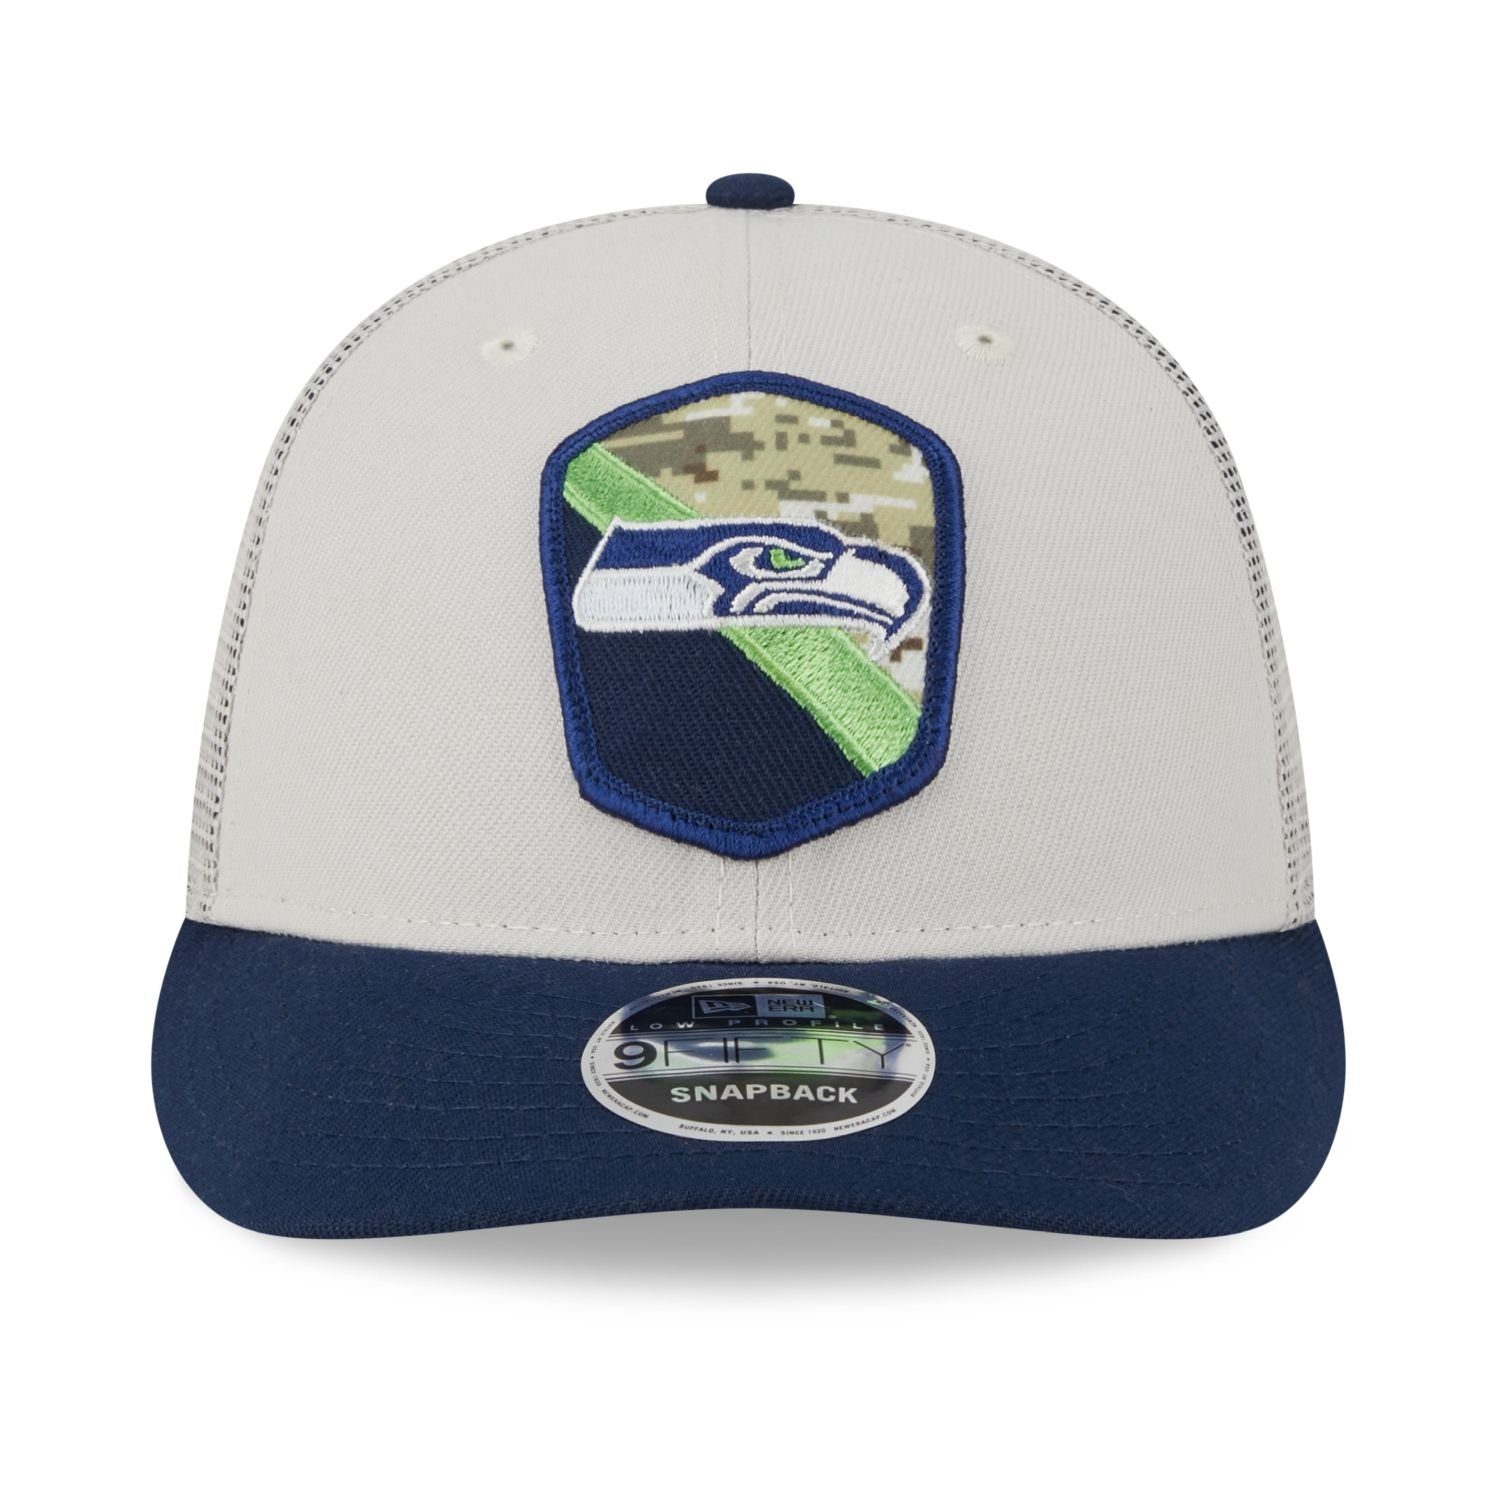 Low Snapback Cap New Era Seattle Service to 9Fifty Snap Salute Seahawks Profile NFL